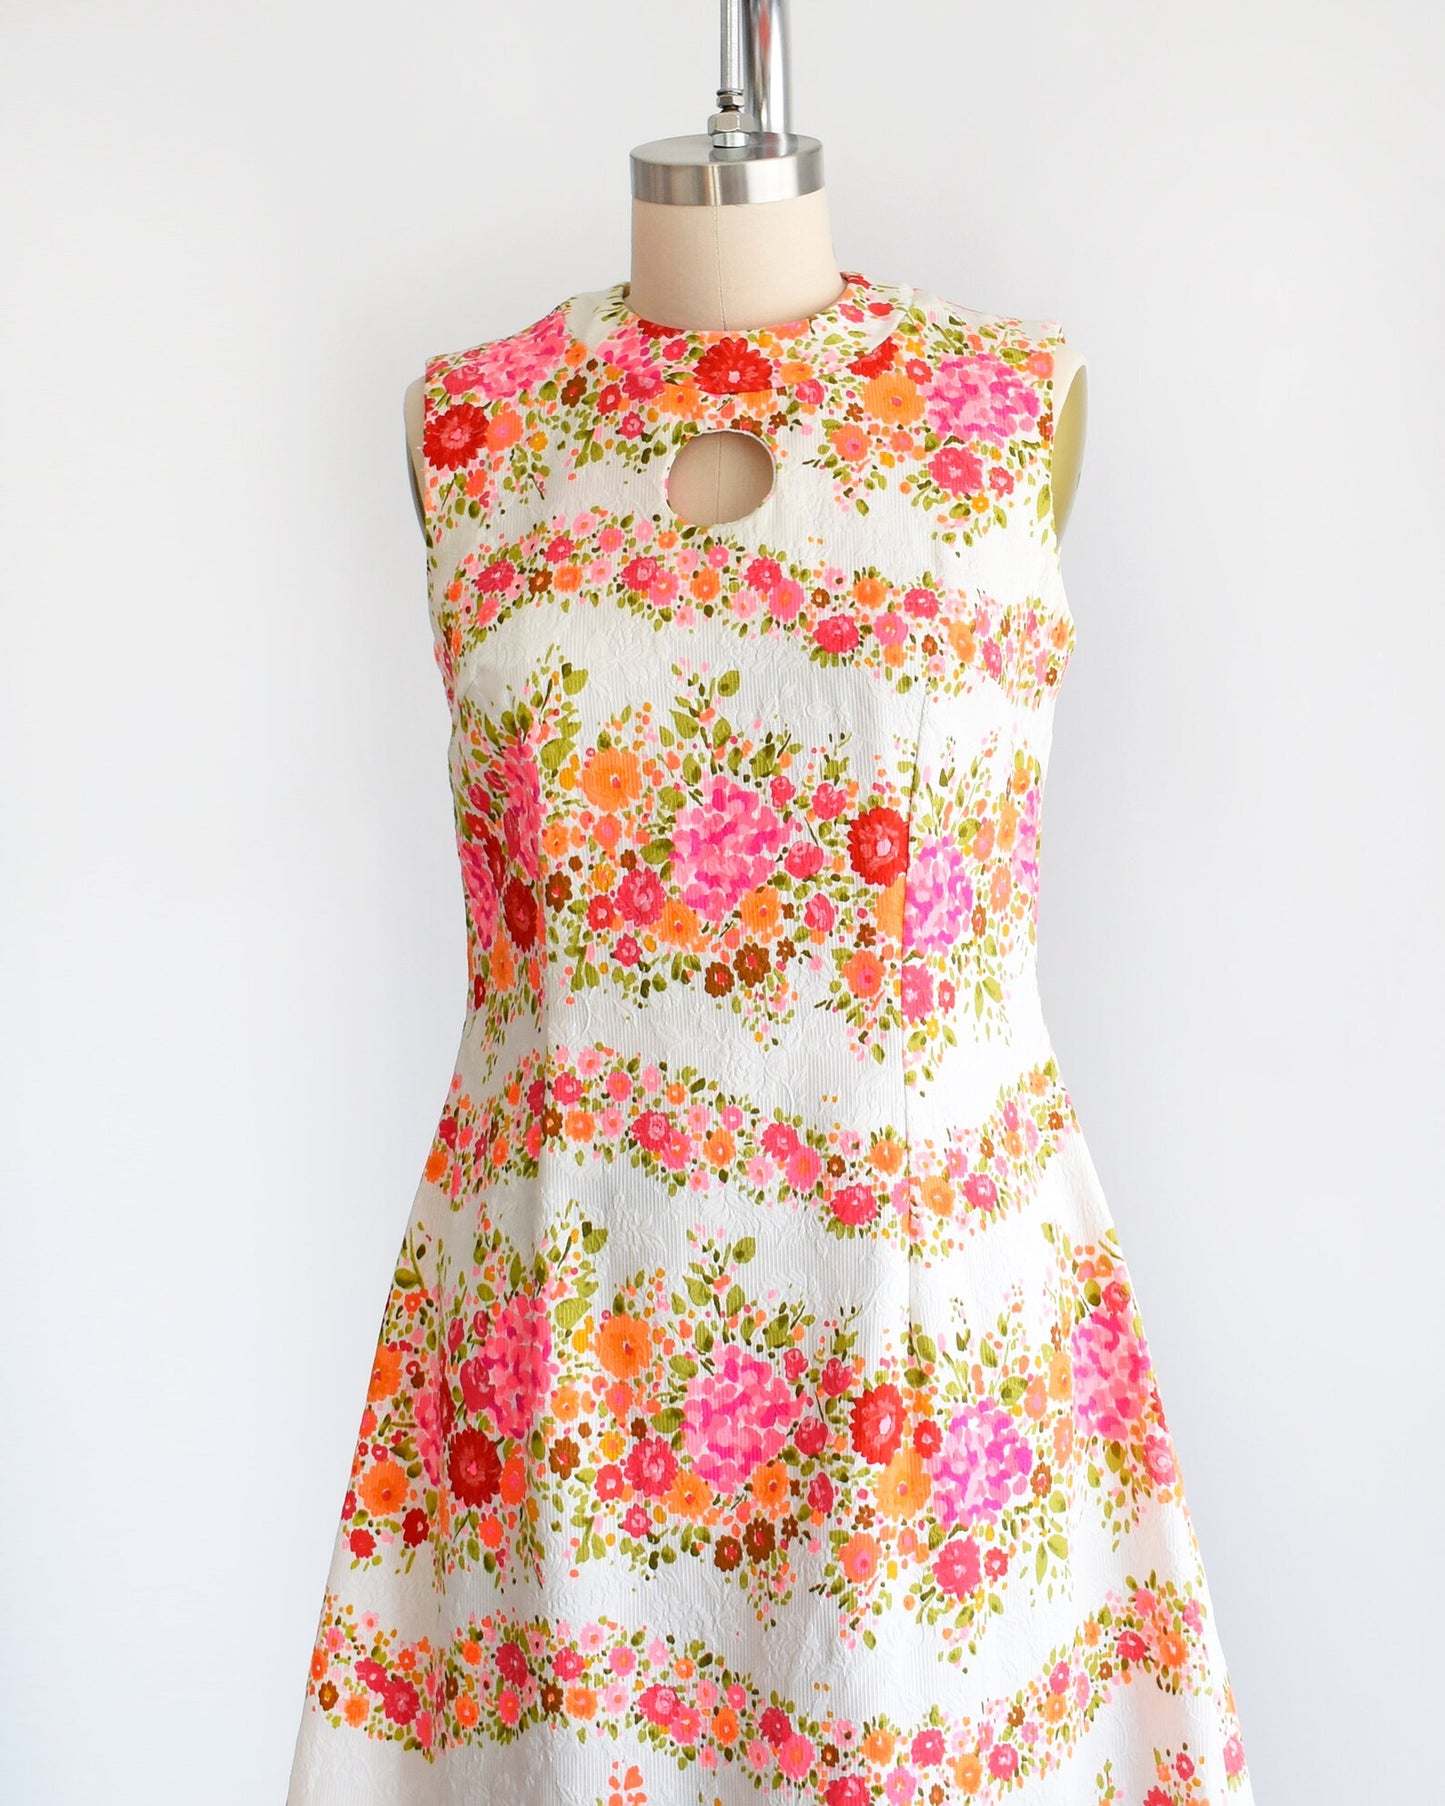 Side front view of a vintage 60s/70s white dress that has a vibrant pink, orange, and green floral print in wavy horizontal stripes going down the dress. There is a circle cut out under the collar. The dress is on a dress form.